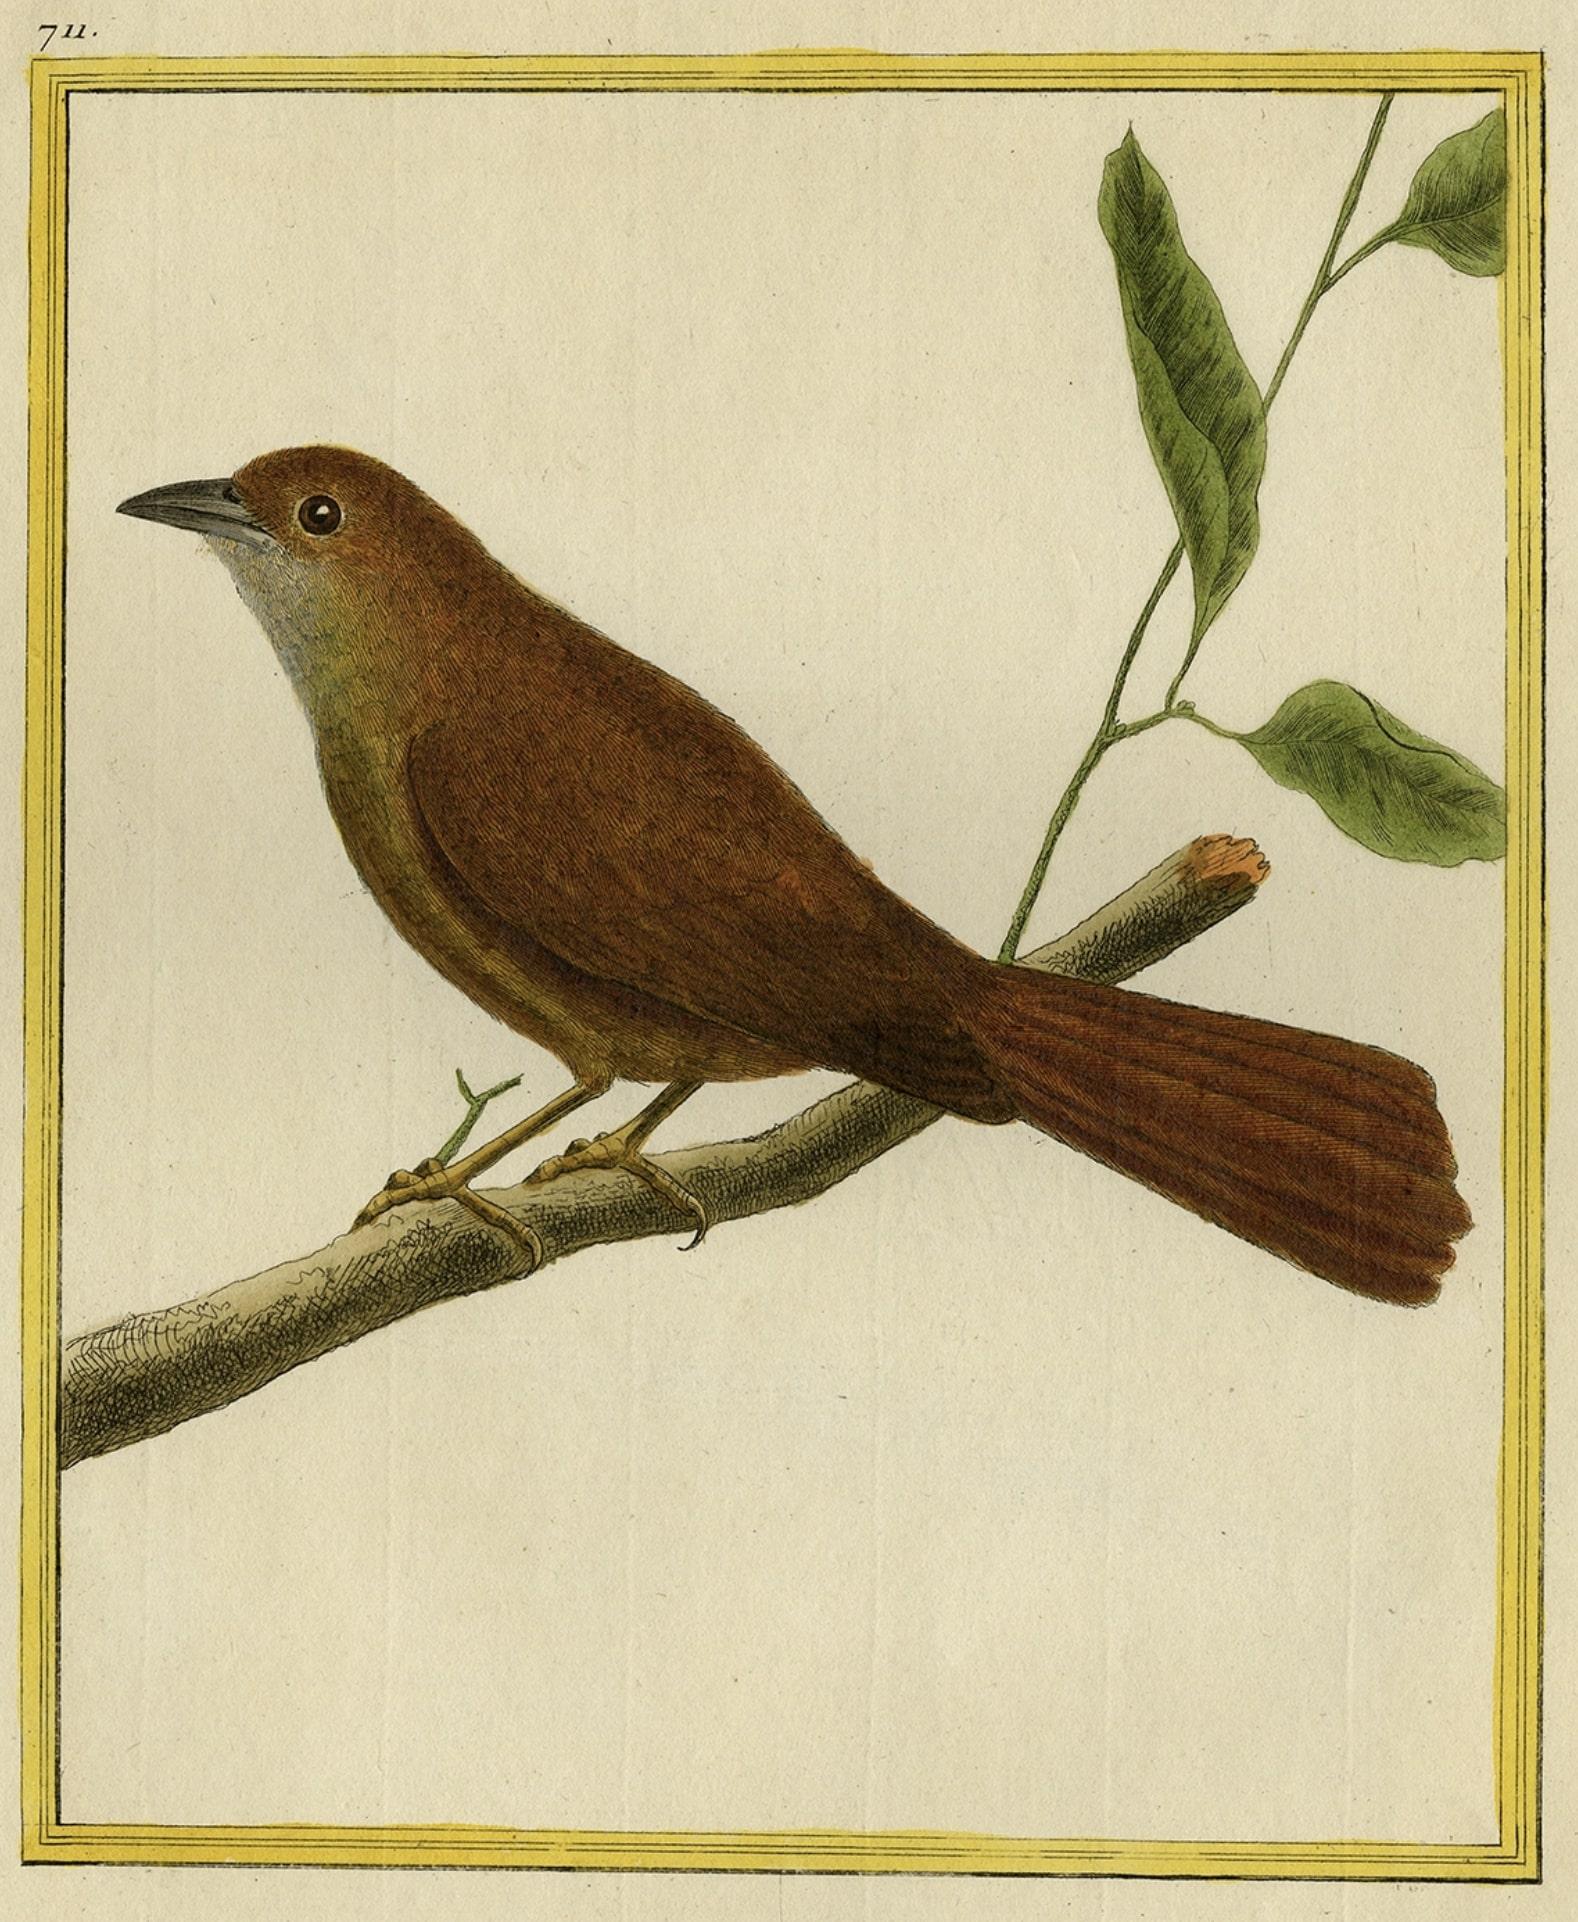 Antique print titled 'La Tangaroux, de Cayenne.' 

This print shows a tanager bird. Originates from 'Histoire Naturelle des Oiseaux', by Comte de Buffon, published in Paris from 1770 to 1786. This is considered the most important 18th c.